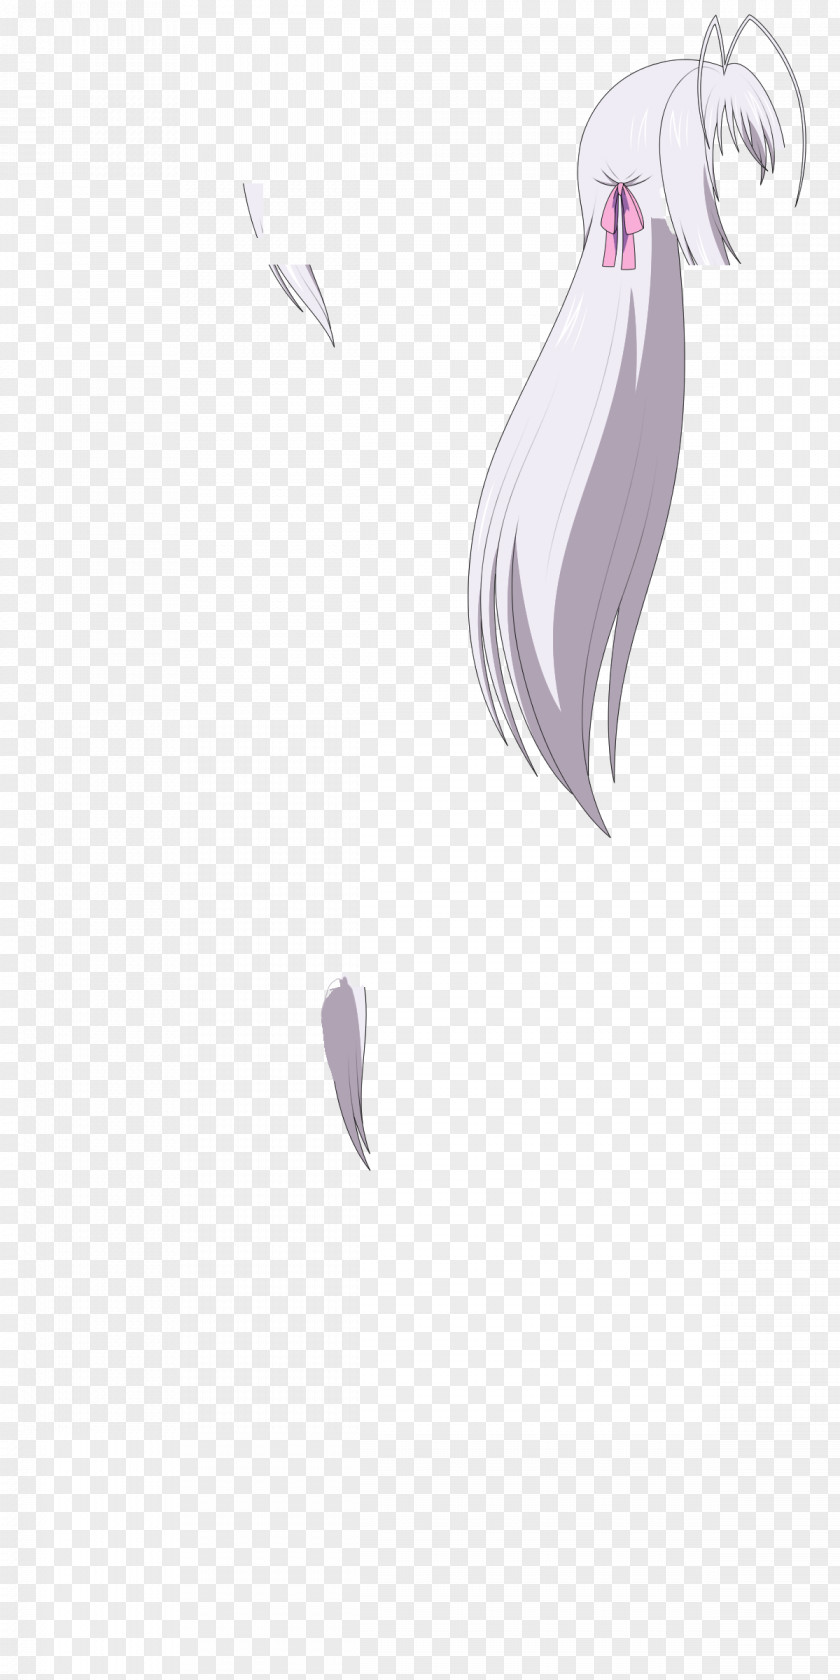 Dxd Product Design Feather Neck PNG